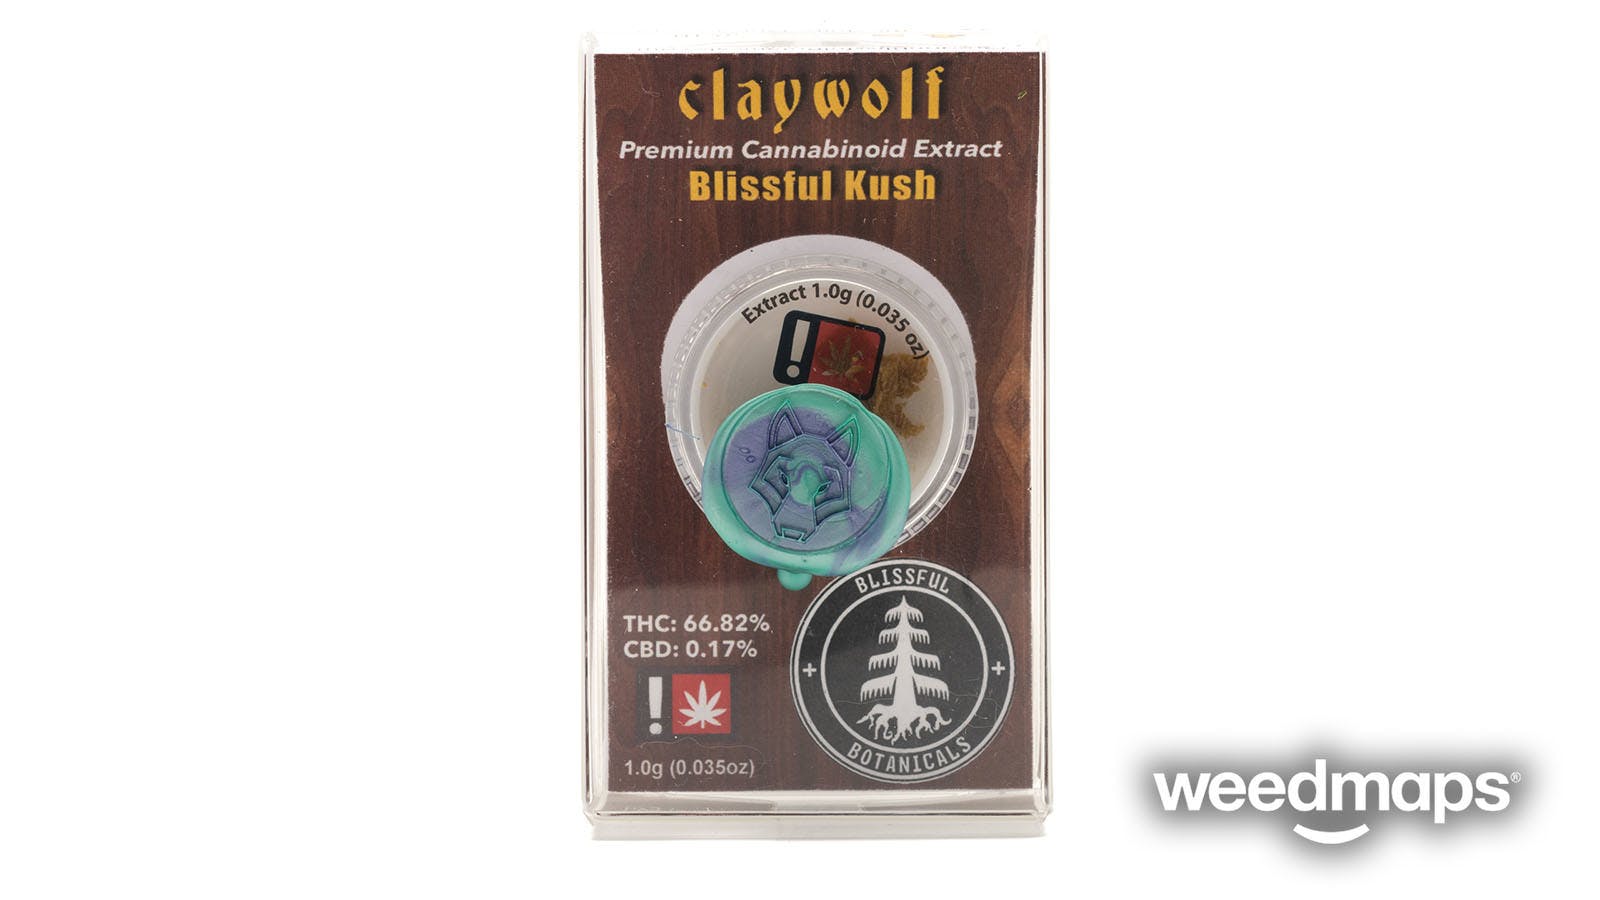 concentrate-clay-wolf-1-gram-blissful-kush-premium-extract